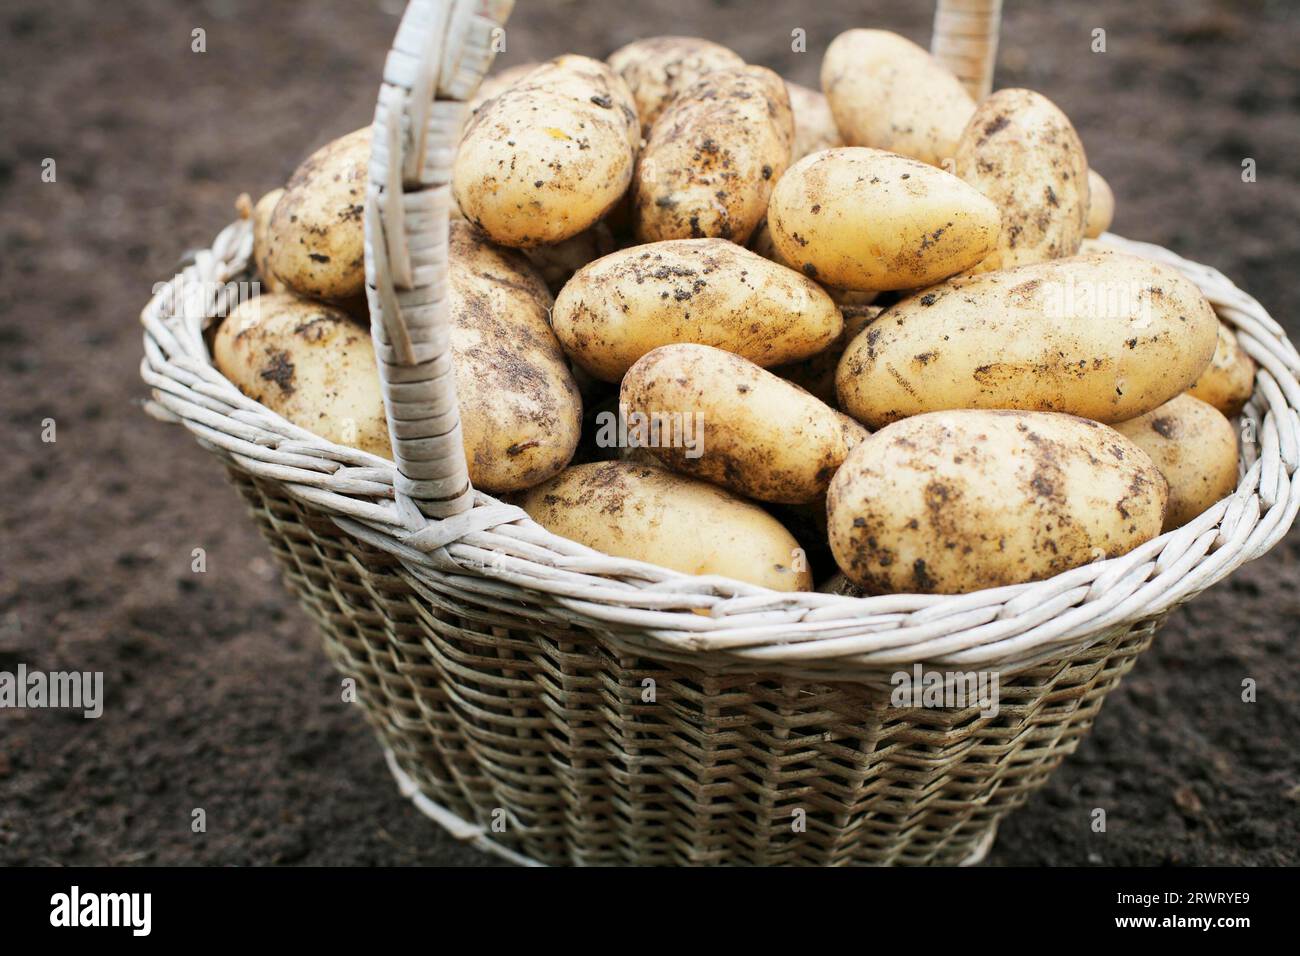 Harvested dirty potatoes in an old basket Stock Photo